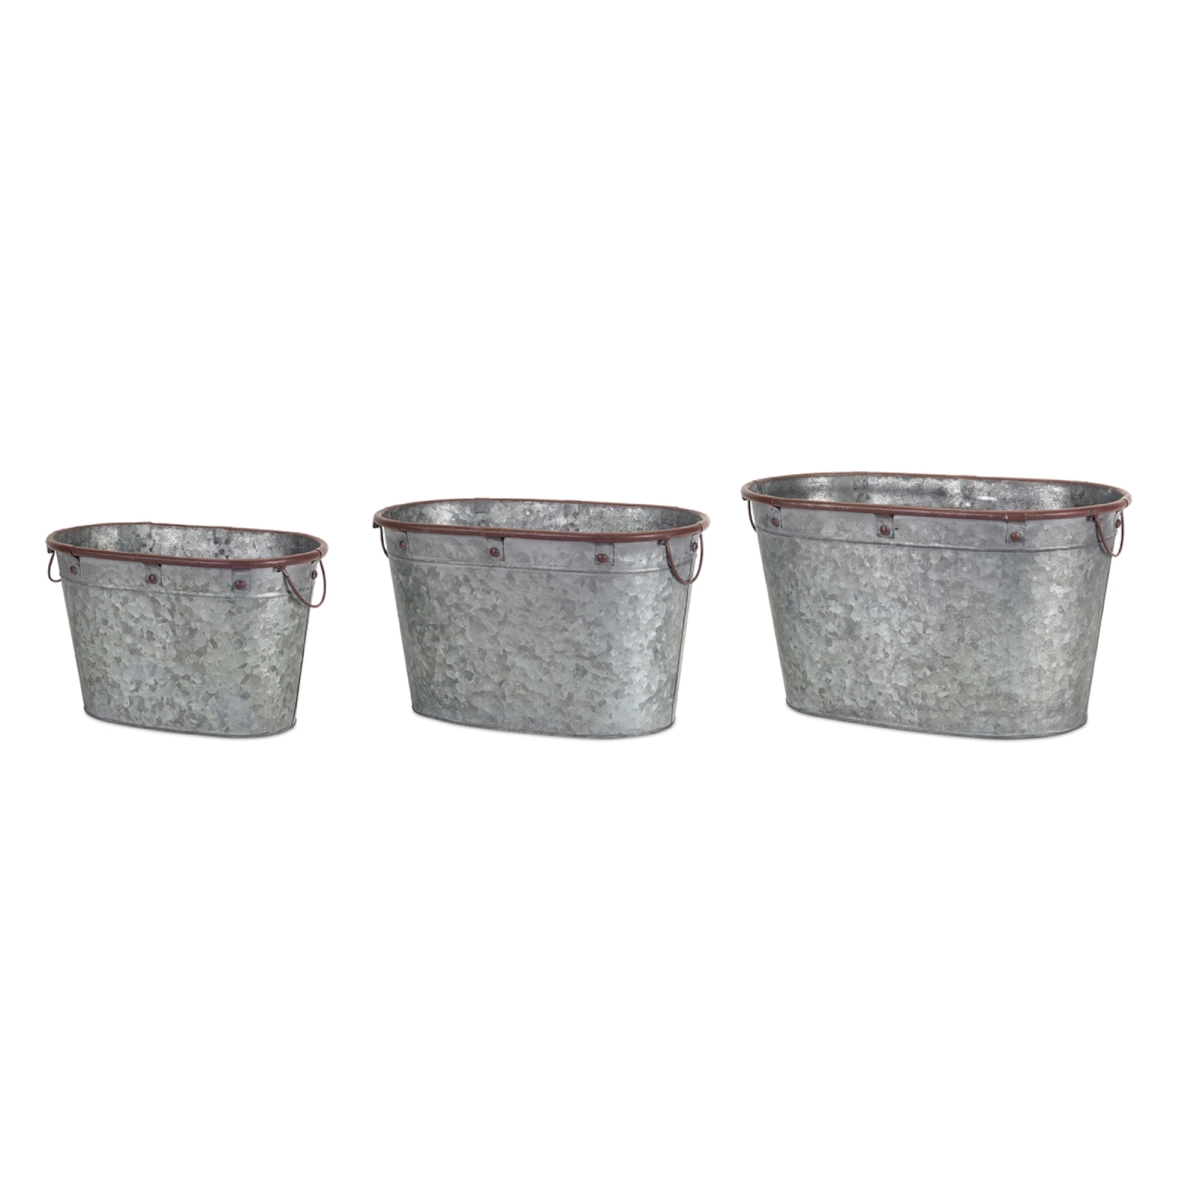 72732ds 9-10 & 11 In. Metal Oval Tub, Tin & Brown - Set Of 3